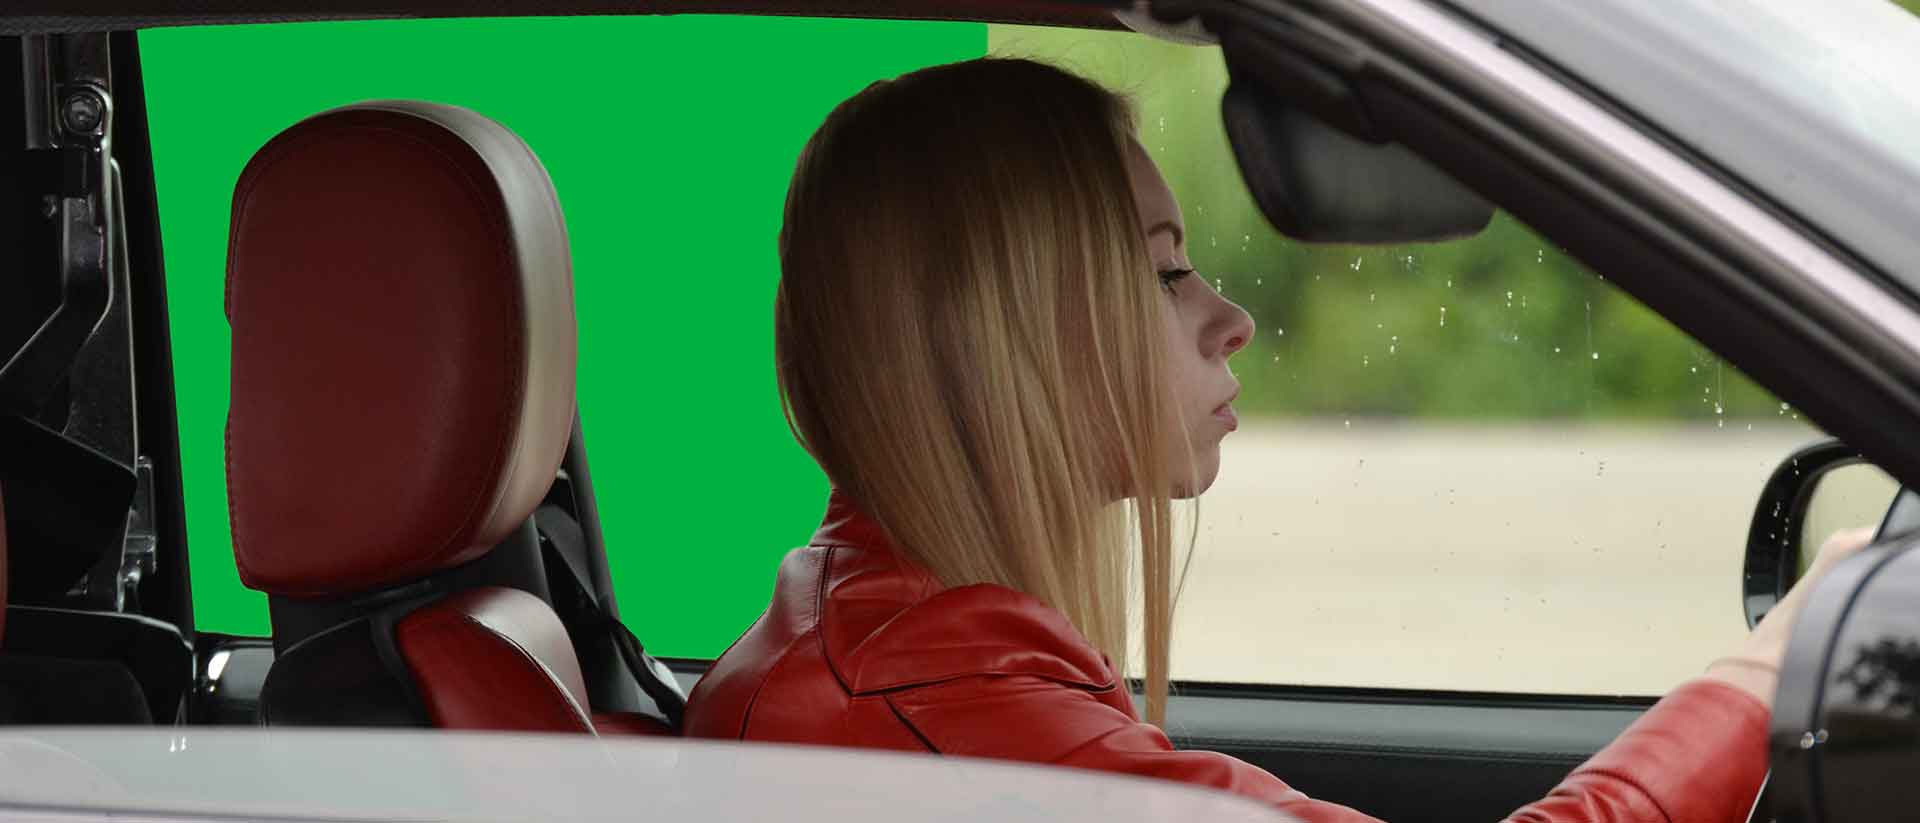 How to Shoot and Composite Vehicle Interiors with a Green Screen